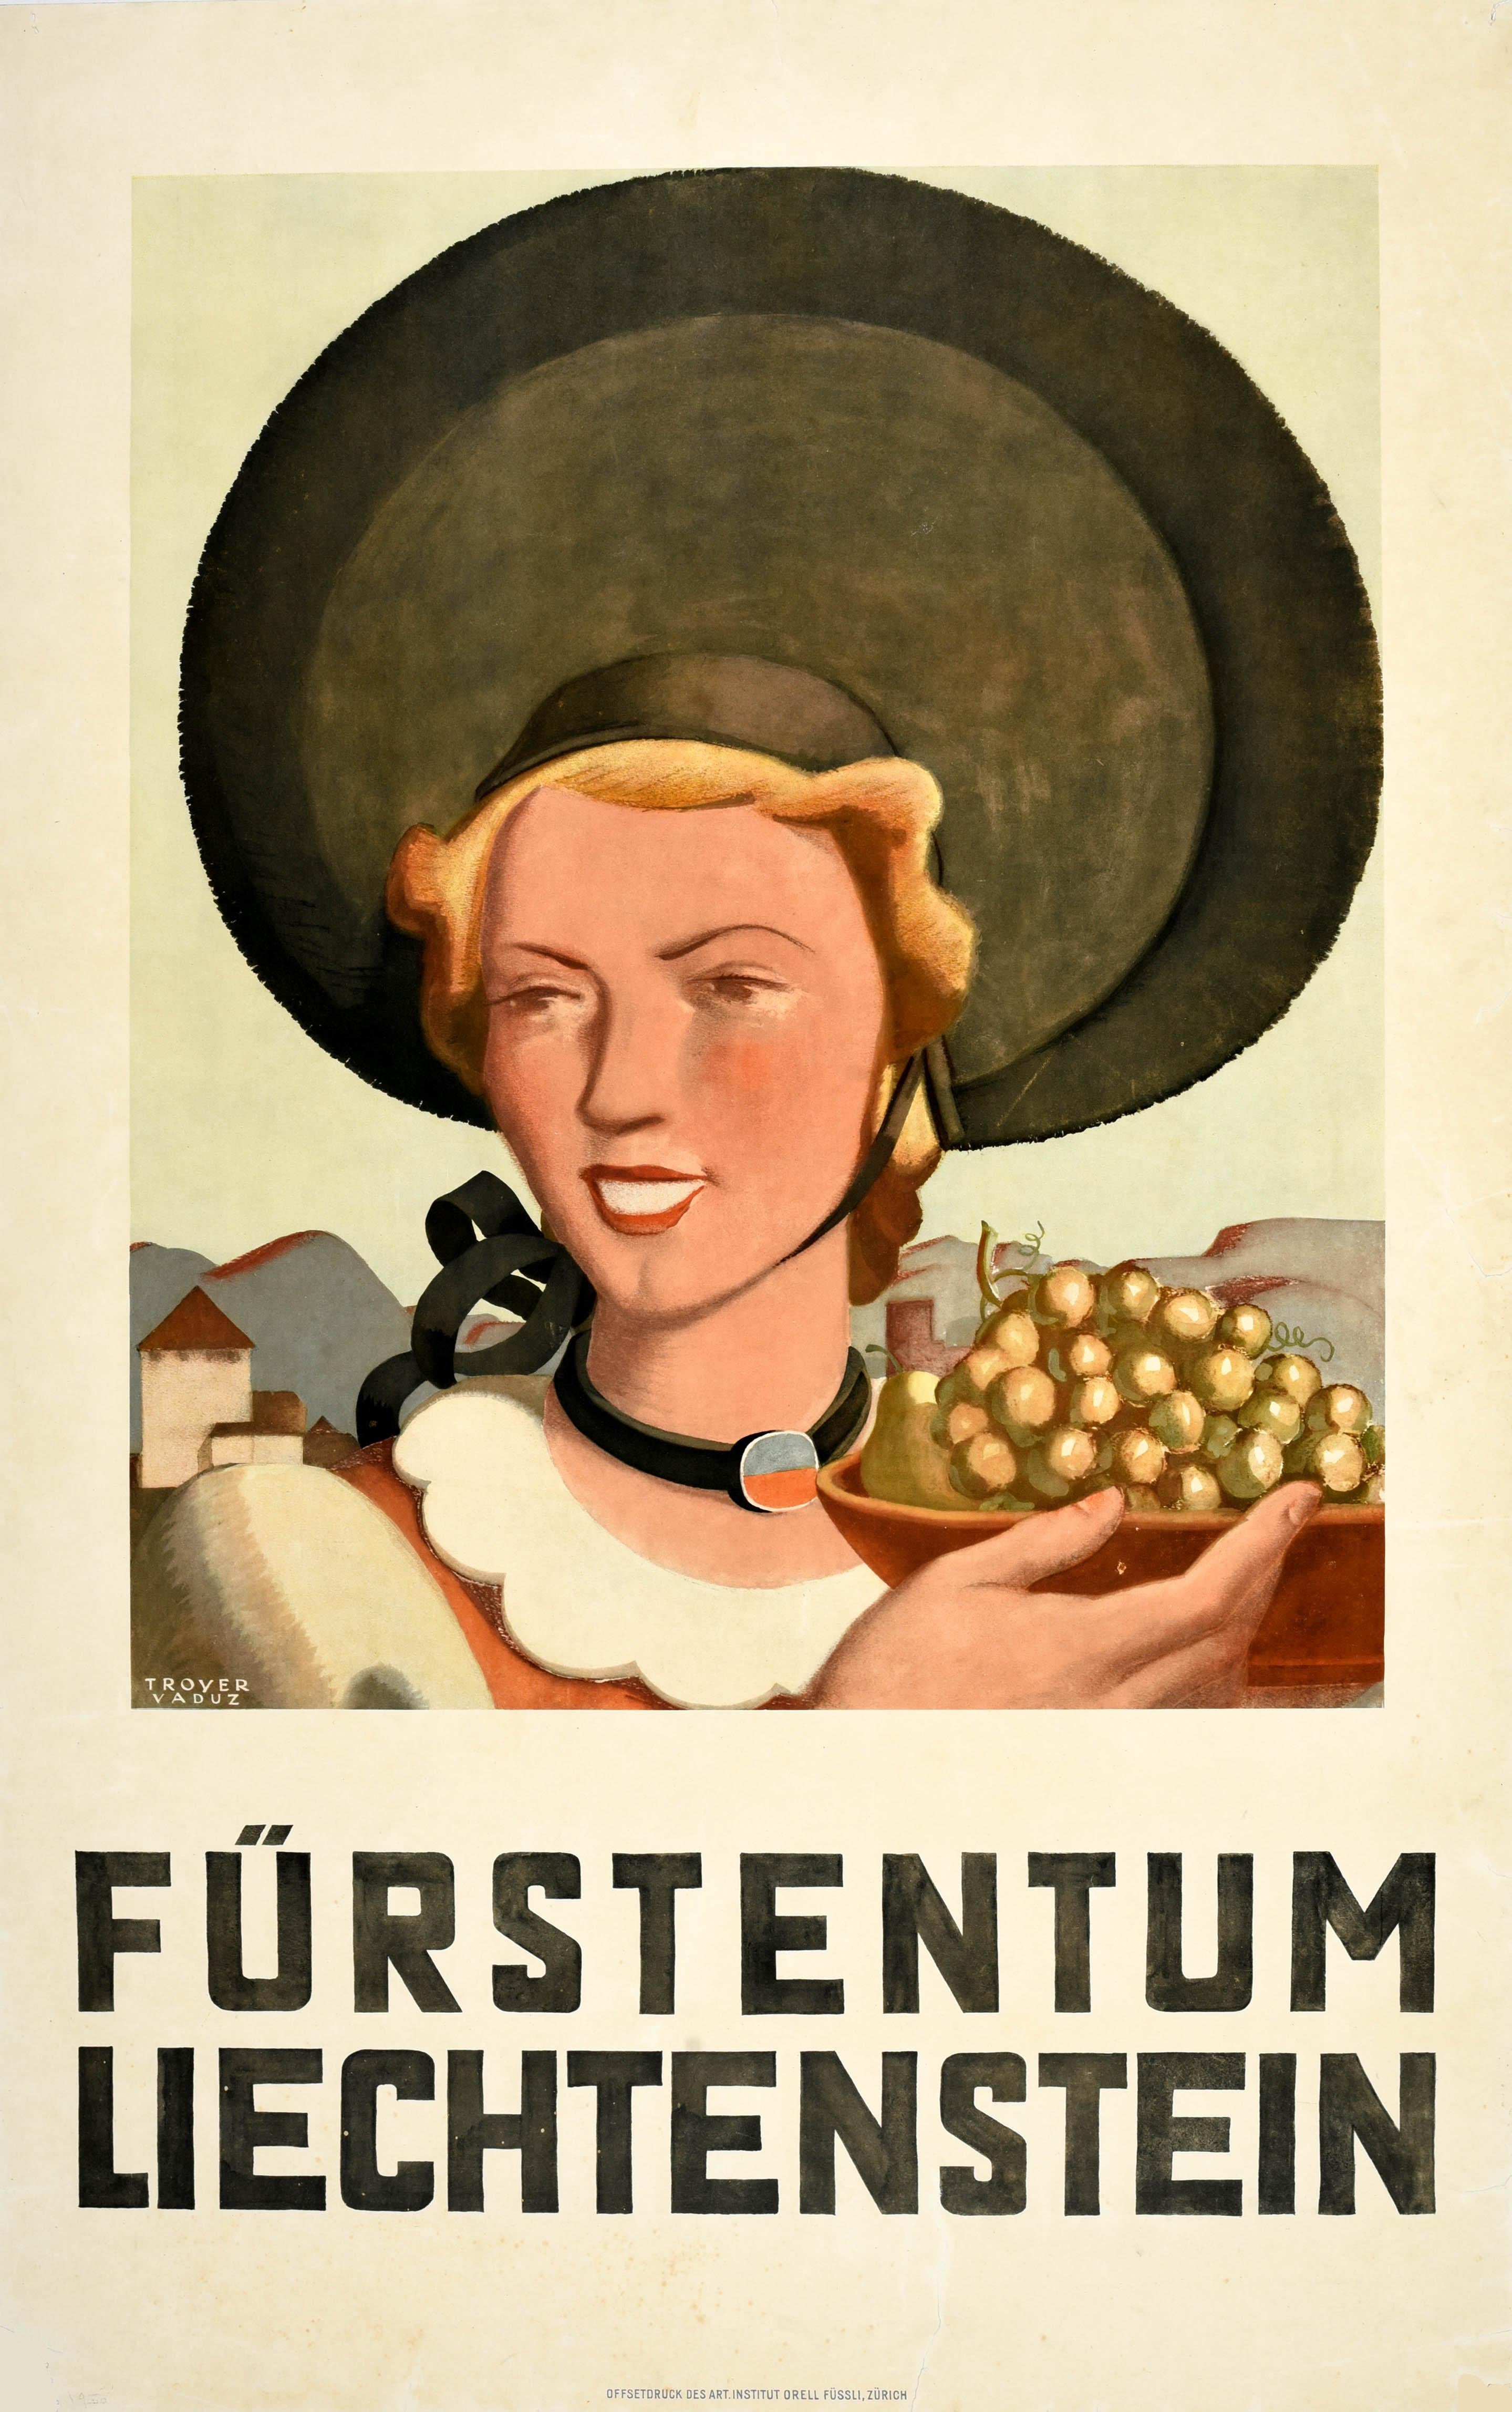 Original vintage travel poster for the Principality of Liechtenstein / Furstentum Liechtenstein featuring artwork by Johannes Troyer (1902-1969) of a smiling lady wearing a large hat and holding up a bowl of grapes in front of an old building and